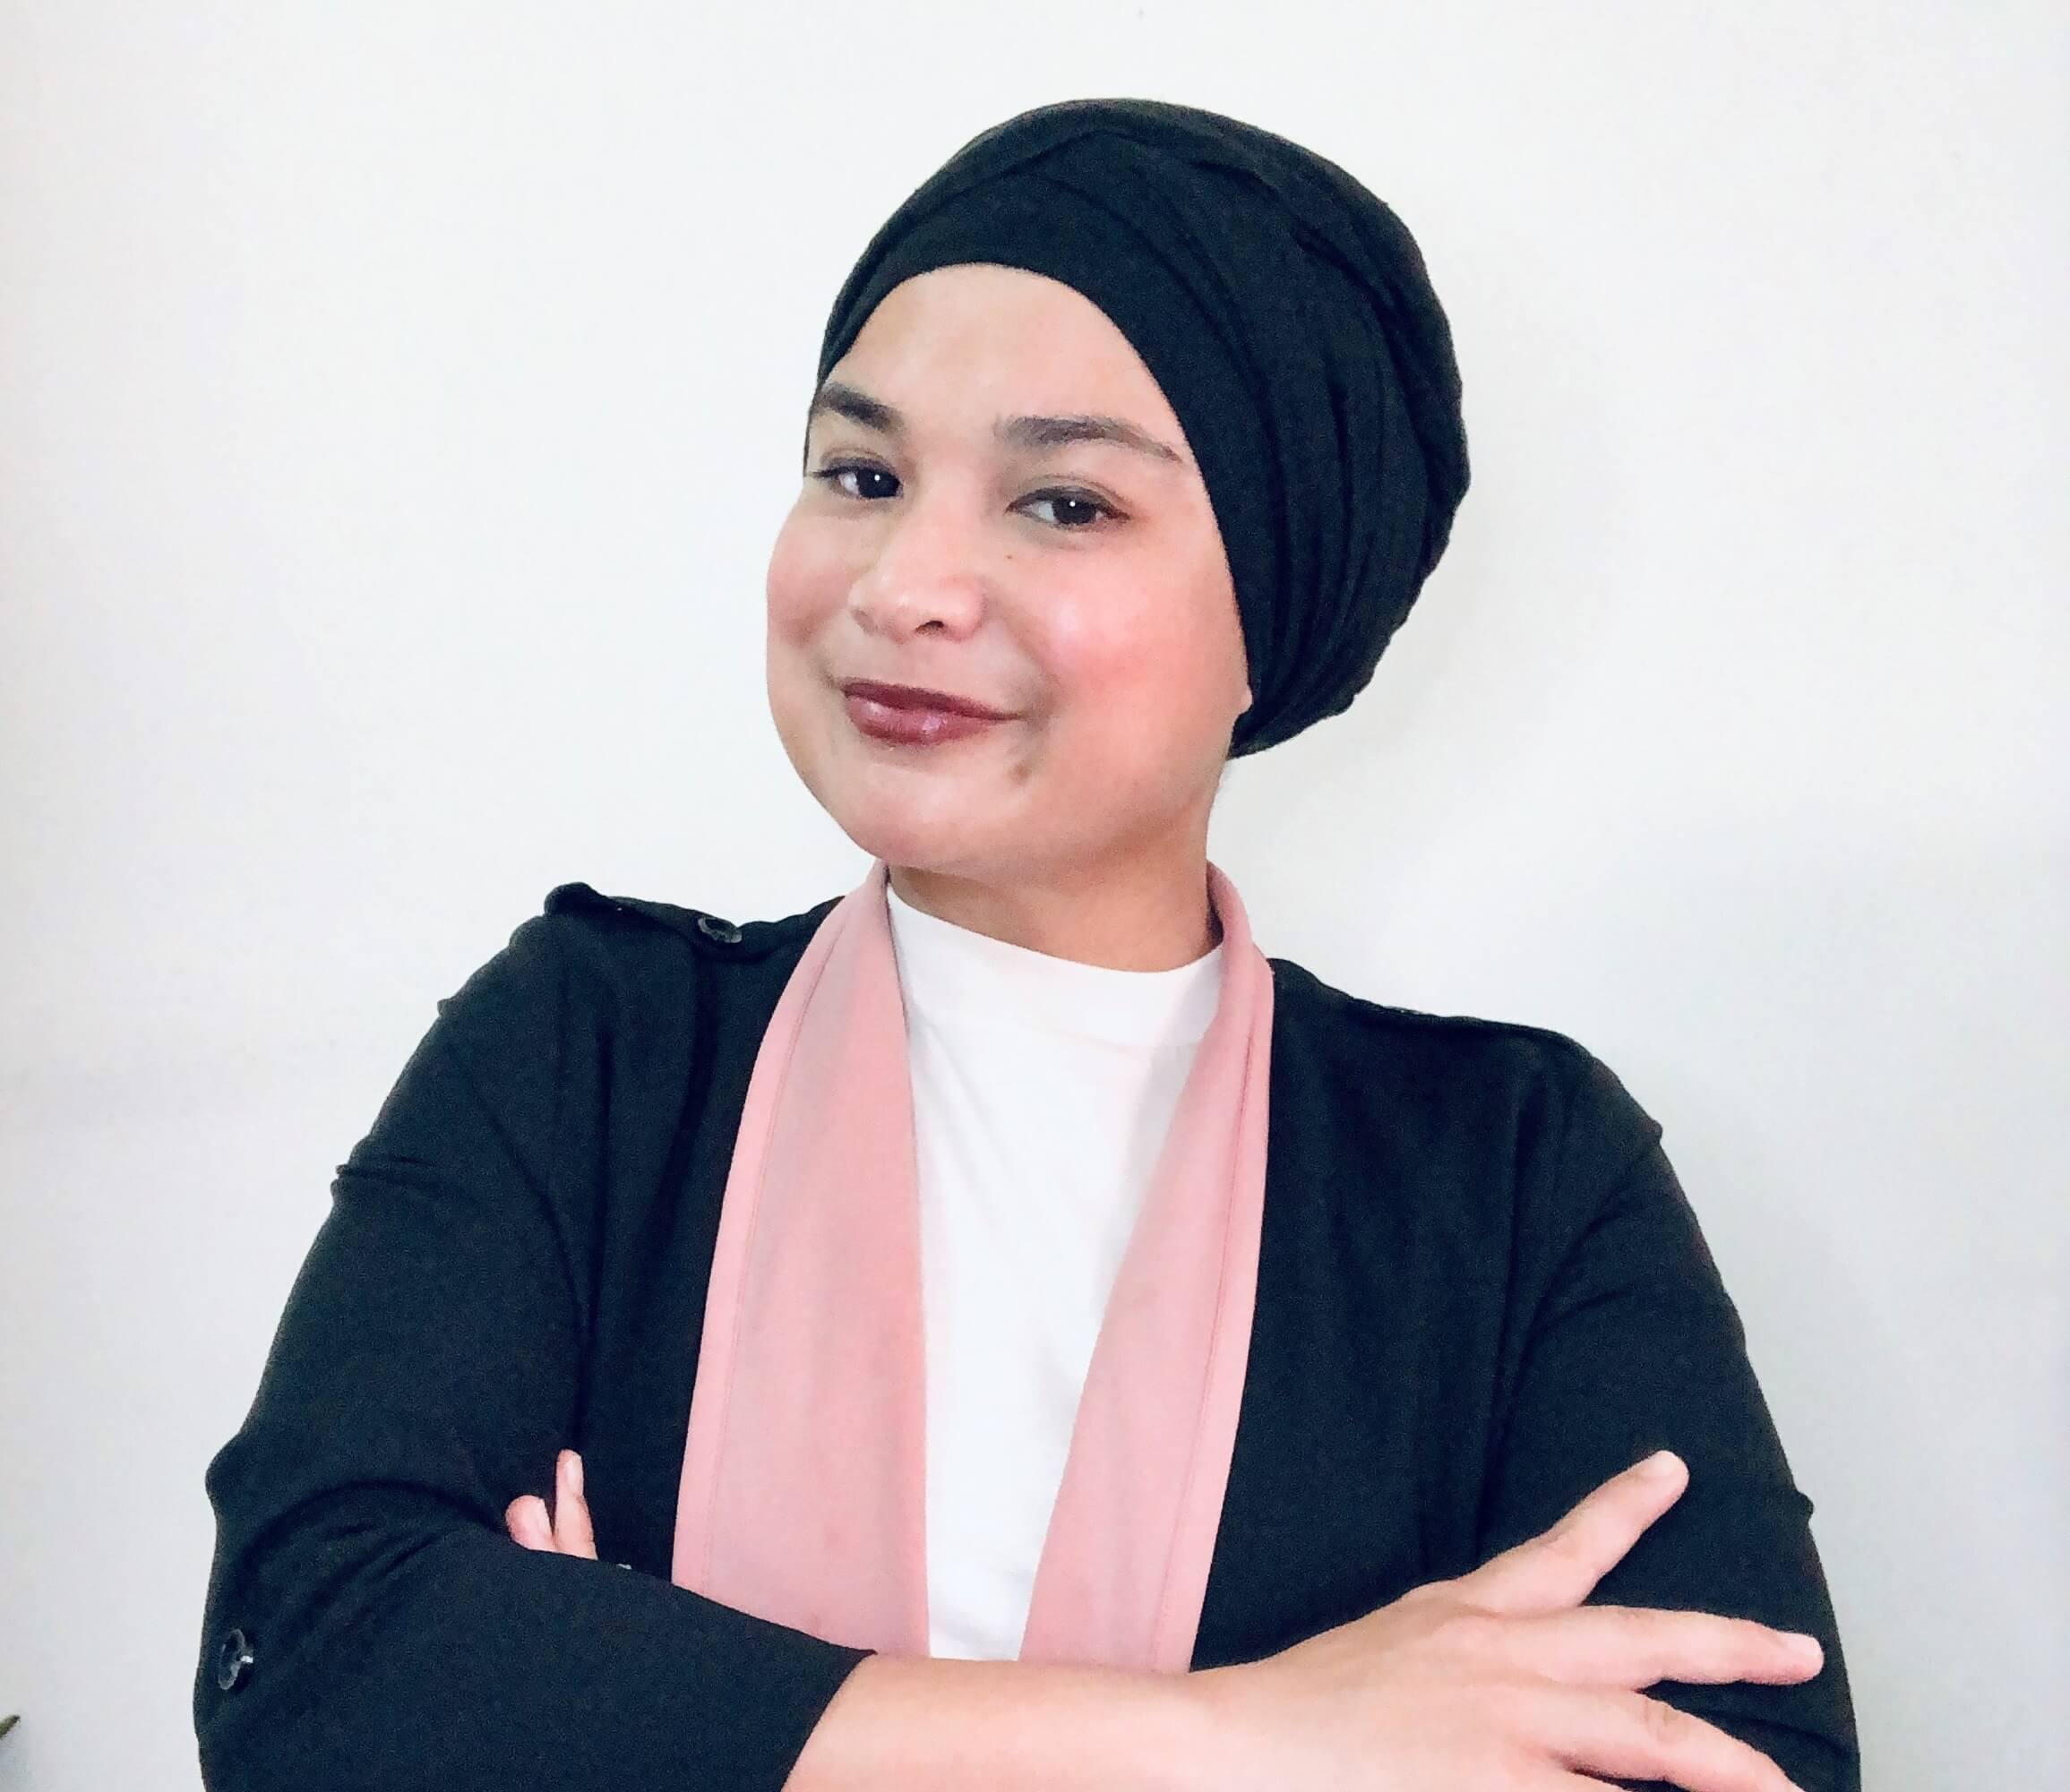 This Chevening Scholar wants Malaysian media to empower women